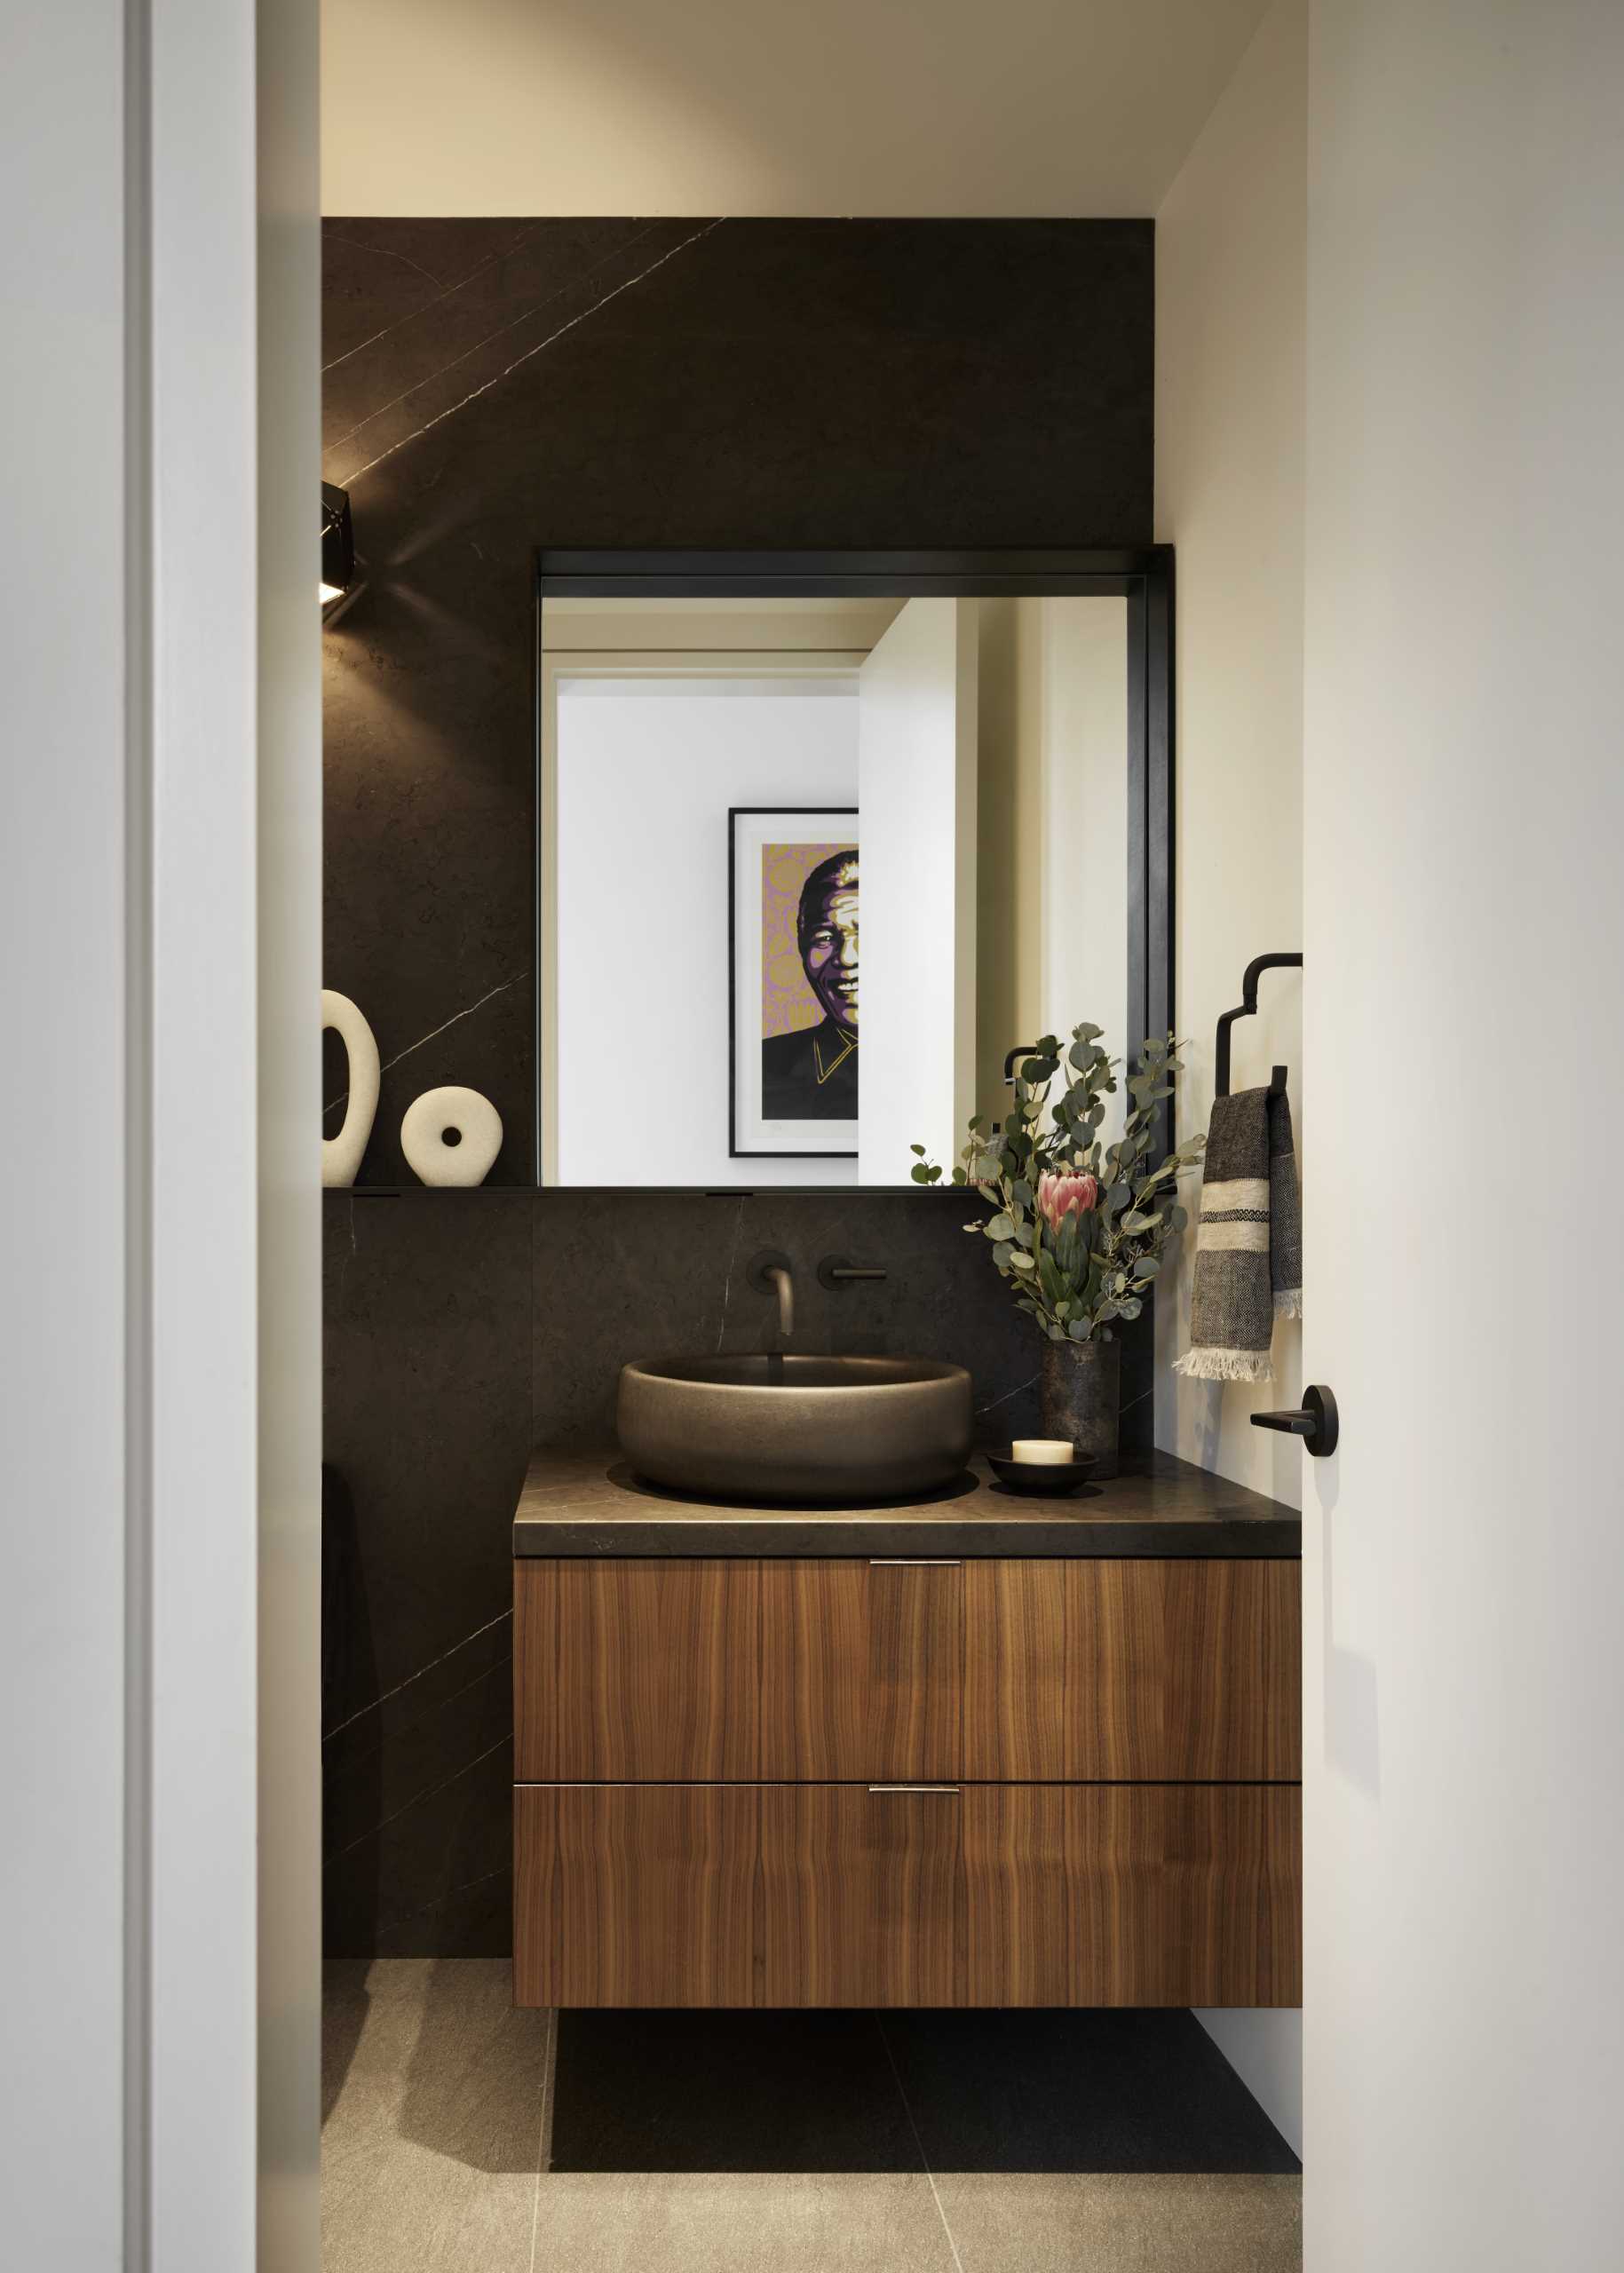 This bathroom includes a dark accent wall that matches the countertop, mirror frame, and basin.